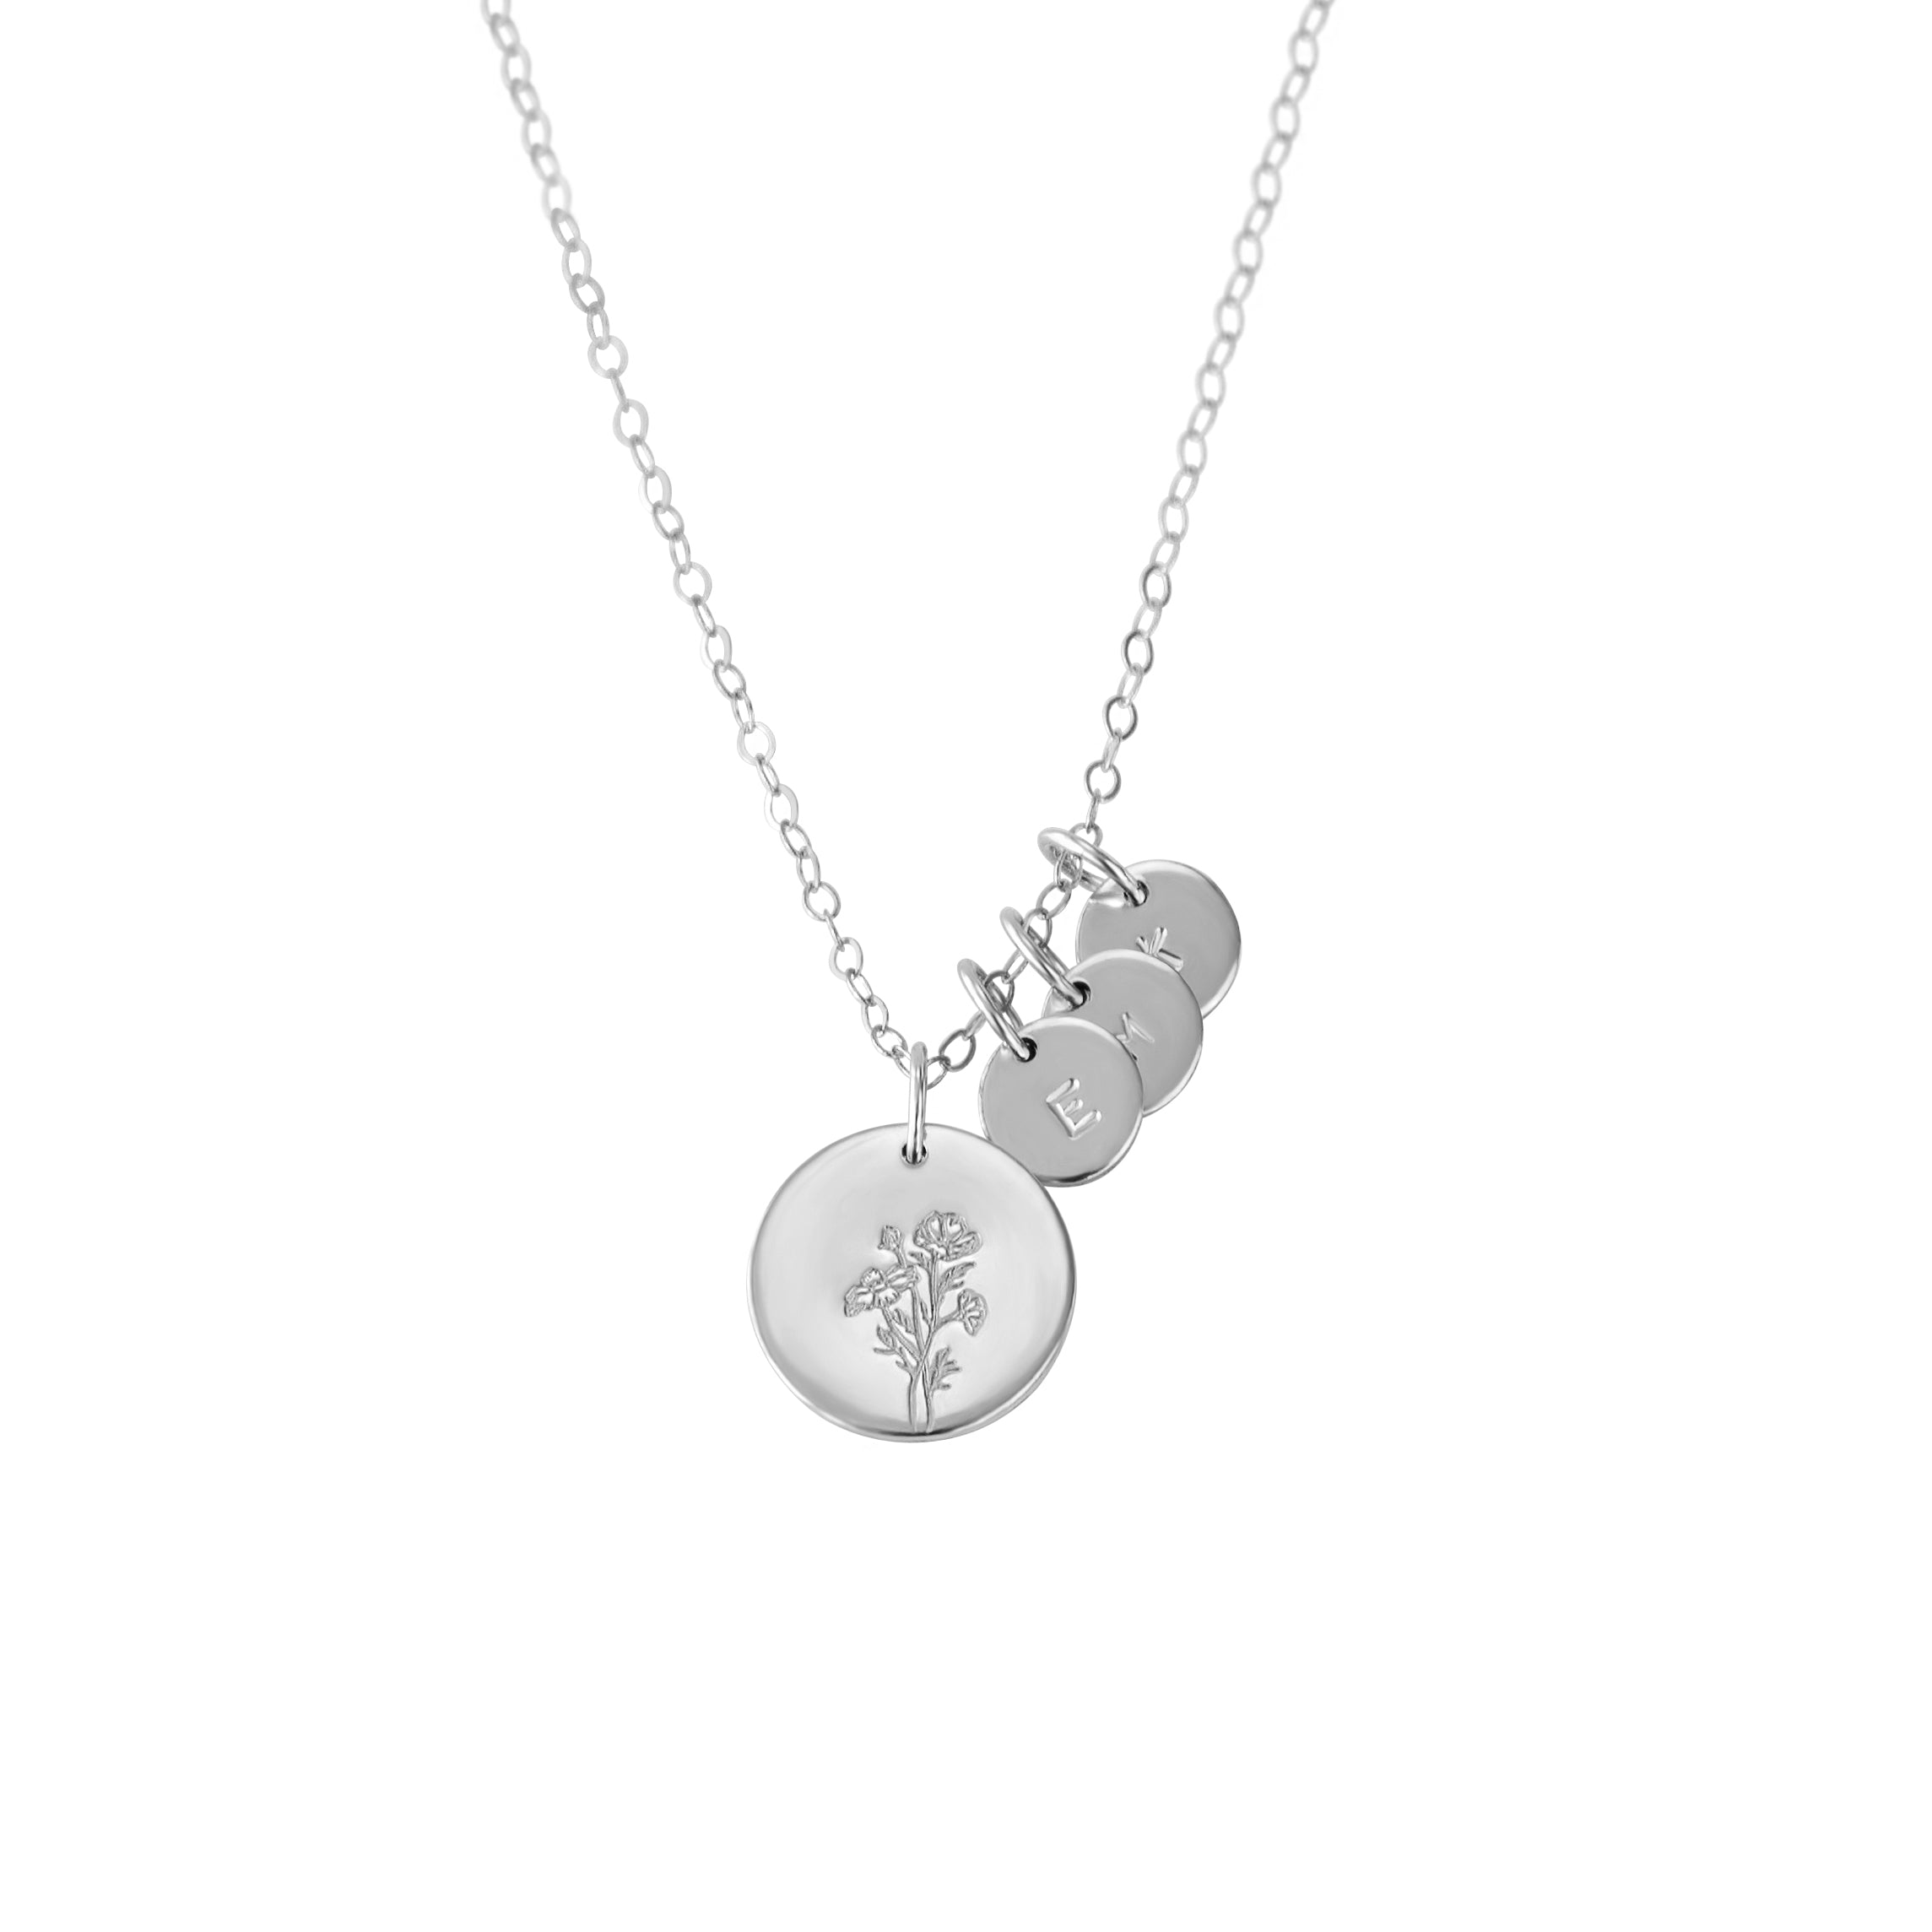 Olivia Personalized Charm Necklace